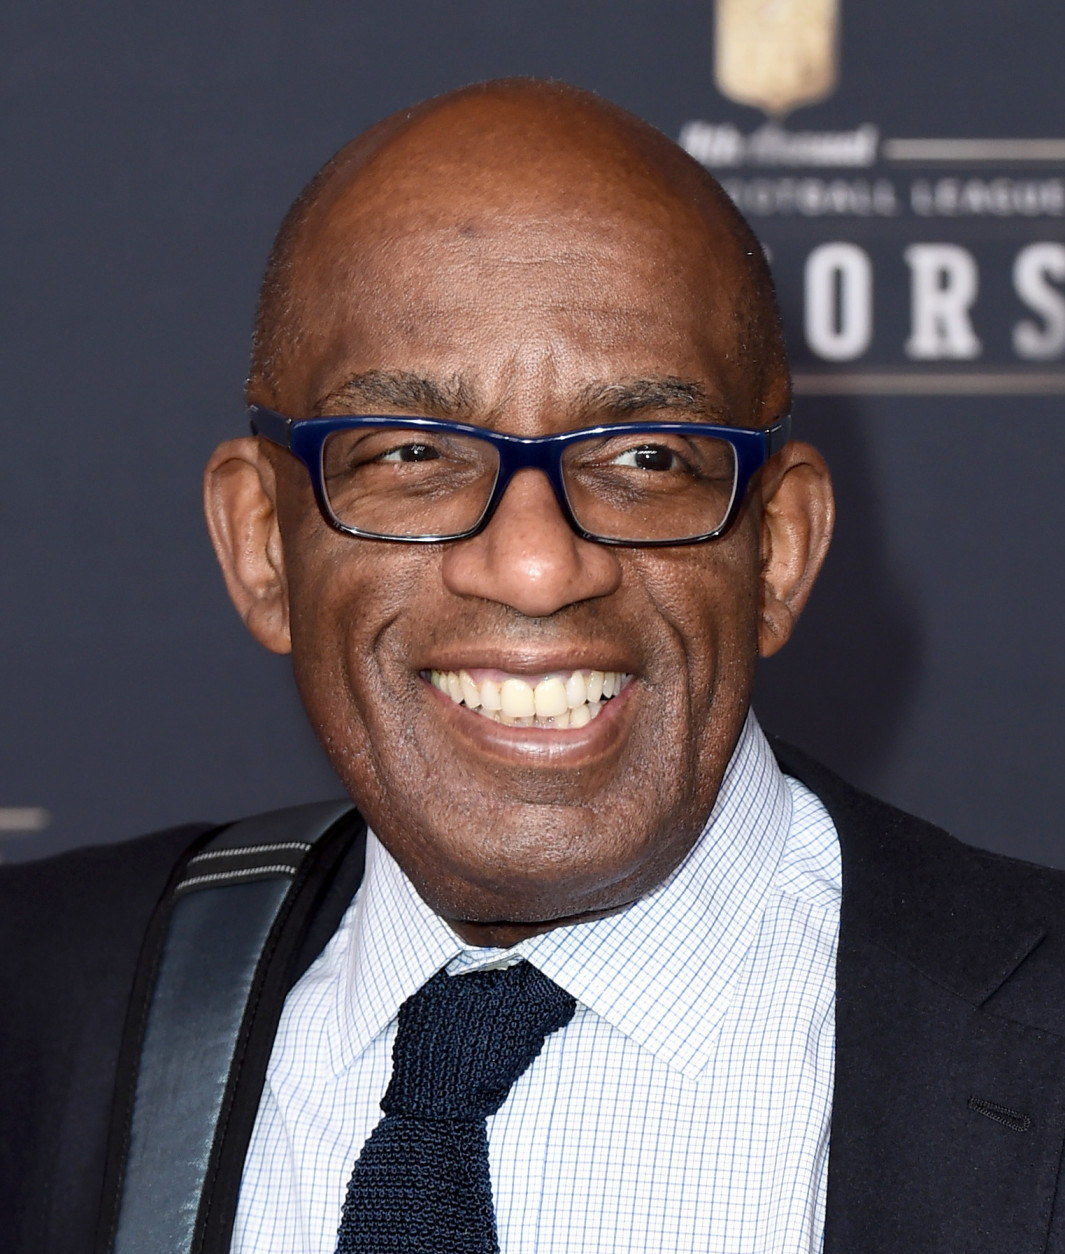 “Today” show weatherman Al Roker is 61 on Aug. 20. (Photo by Jordan Strauss/Invision for NFL/AP Images)